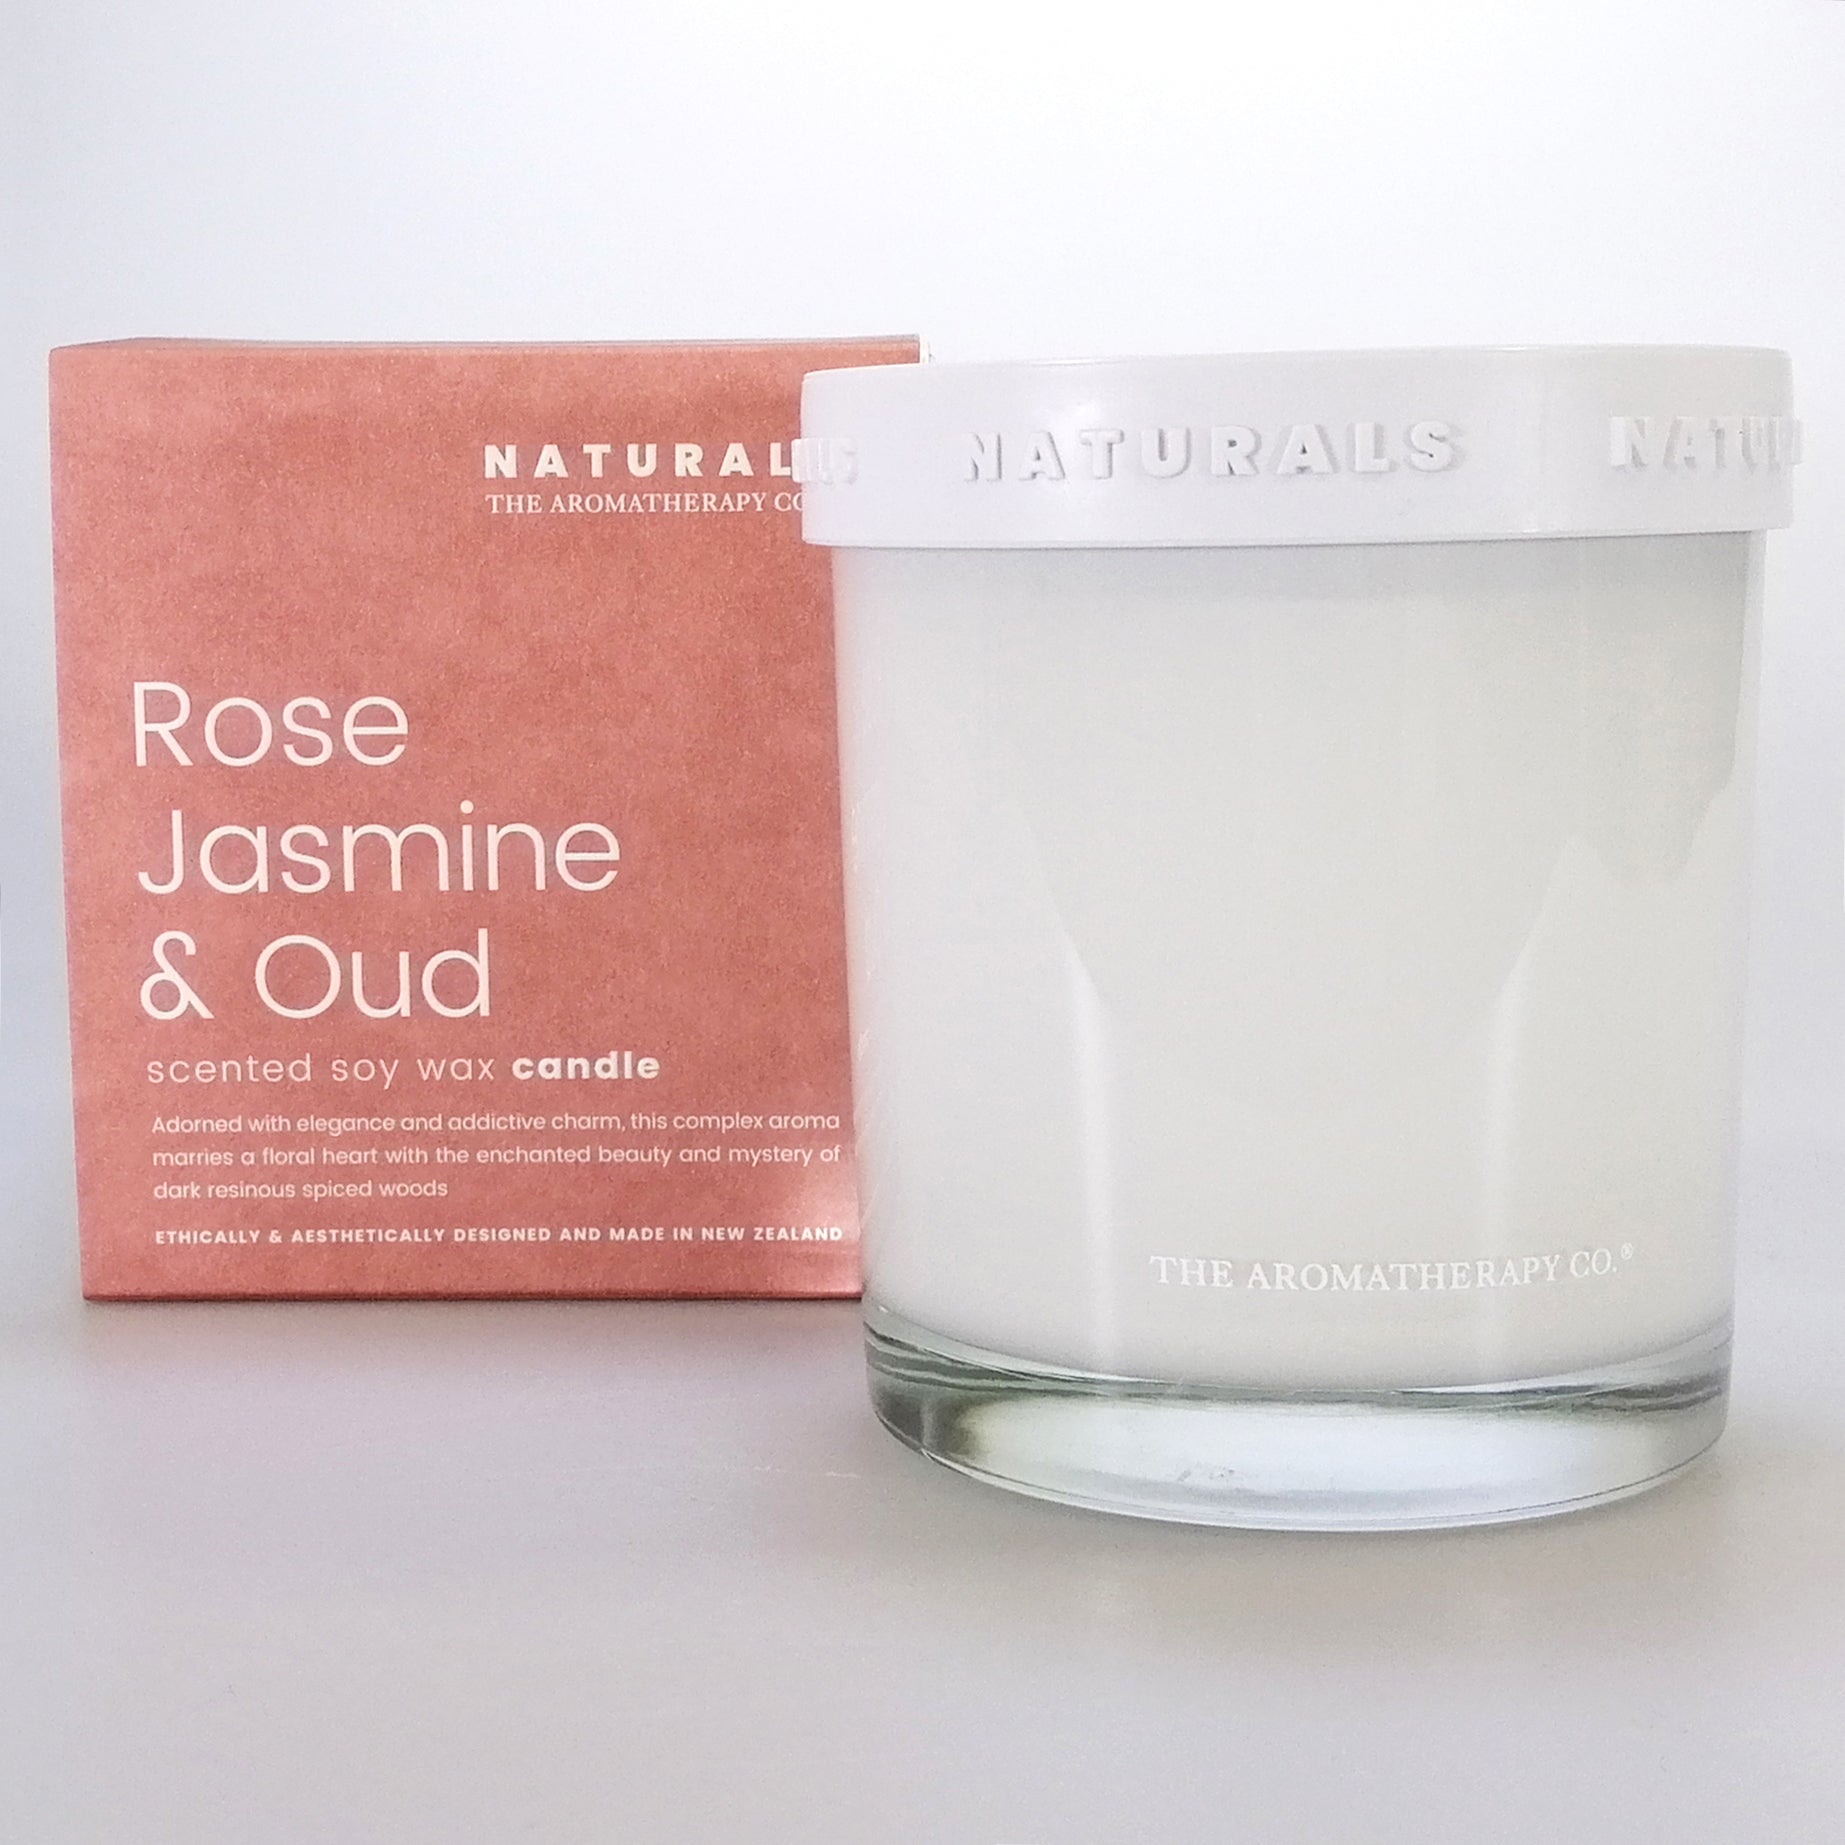 The Aromatherapy Co. Naturals - Rose Jasmine & Oud Soy Wax Candle